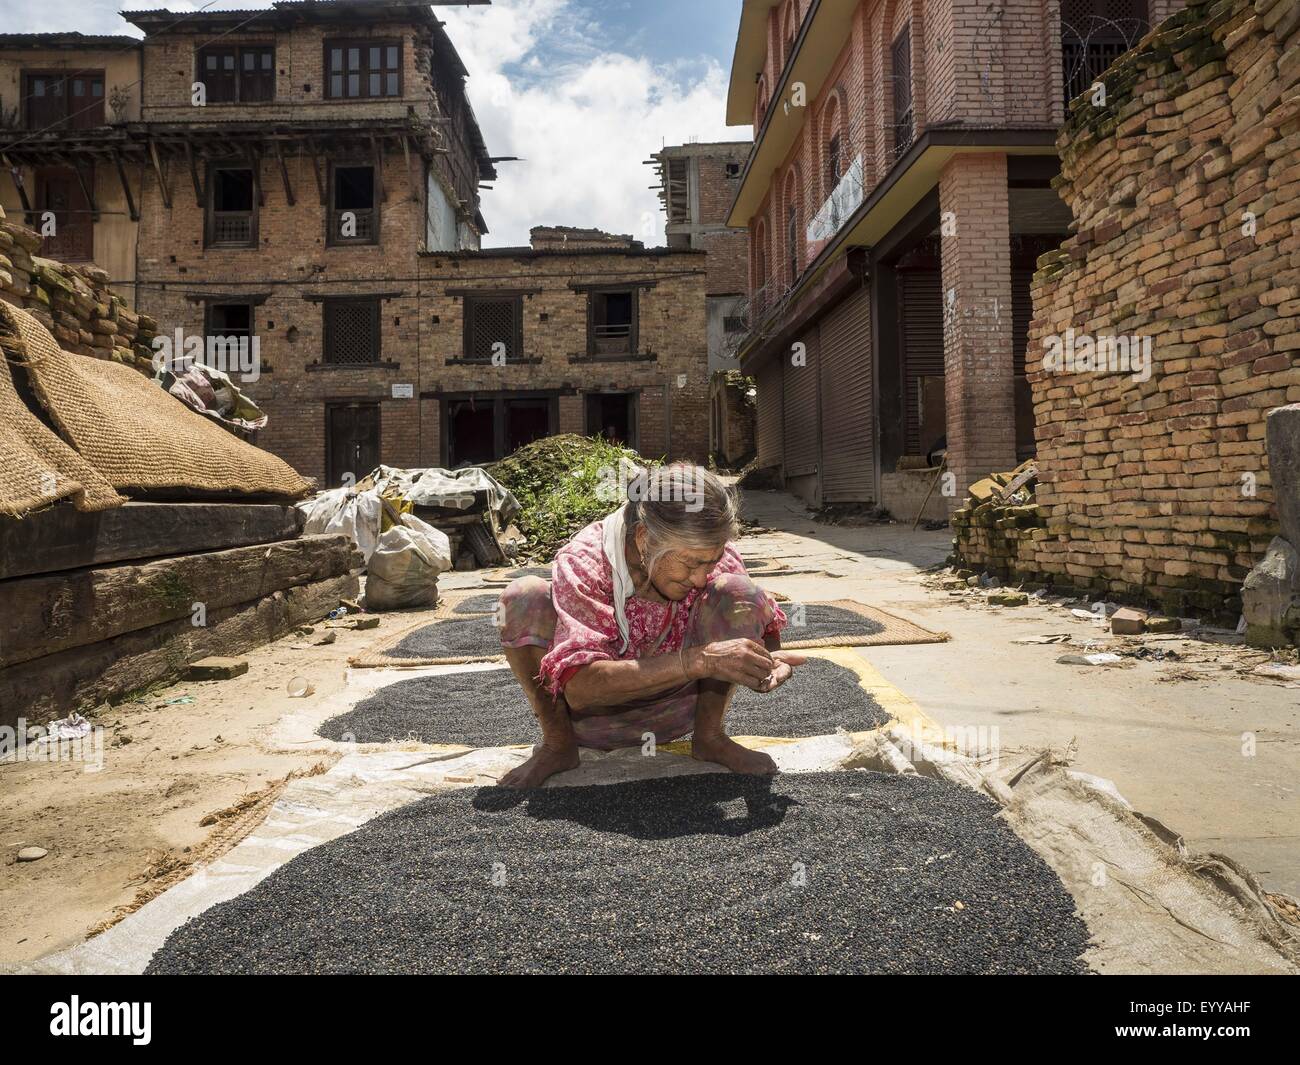 Bungamati, Central Region, Nepal. 4th Aug, 2015. A woman whose home was destroyed in the earthquake dries lentils in the town square in Bungamati, a village about an hour from Kathmandu. Three months after the earthquake many families still live in tents and temporary shelters scattered around the village. The Nepal Earthquake on April 25, 2015, (also known as the Gorkha earthquake) killed more than 9,000 people and injured more than 23,000. It had a magnitude of 7.8. The epicenter was east of the district of Lamjung, and its hypocenter was at a depth of approximately 15Â km (9.3Â mi). It was Stock Photo